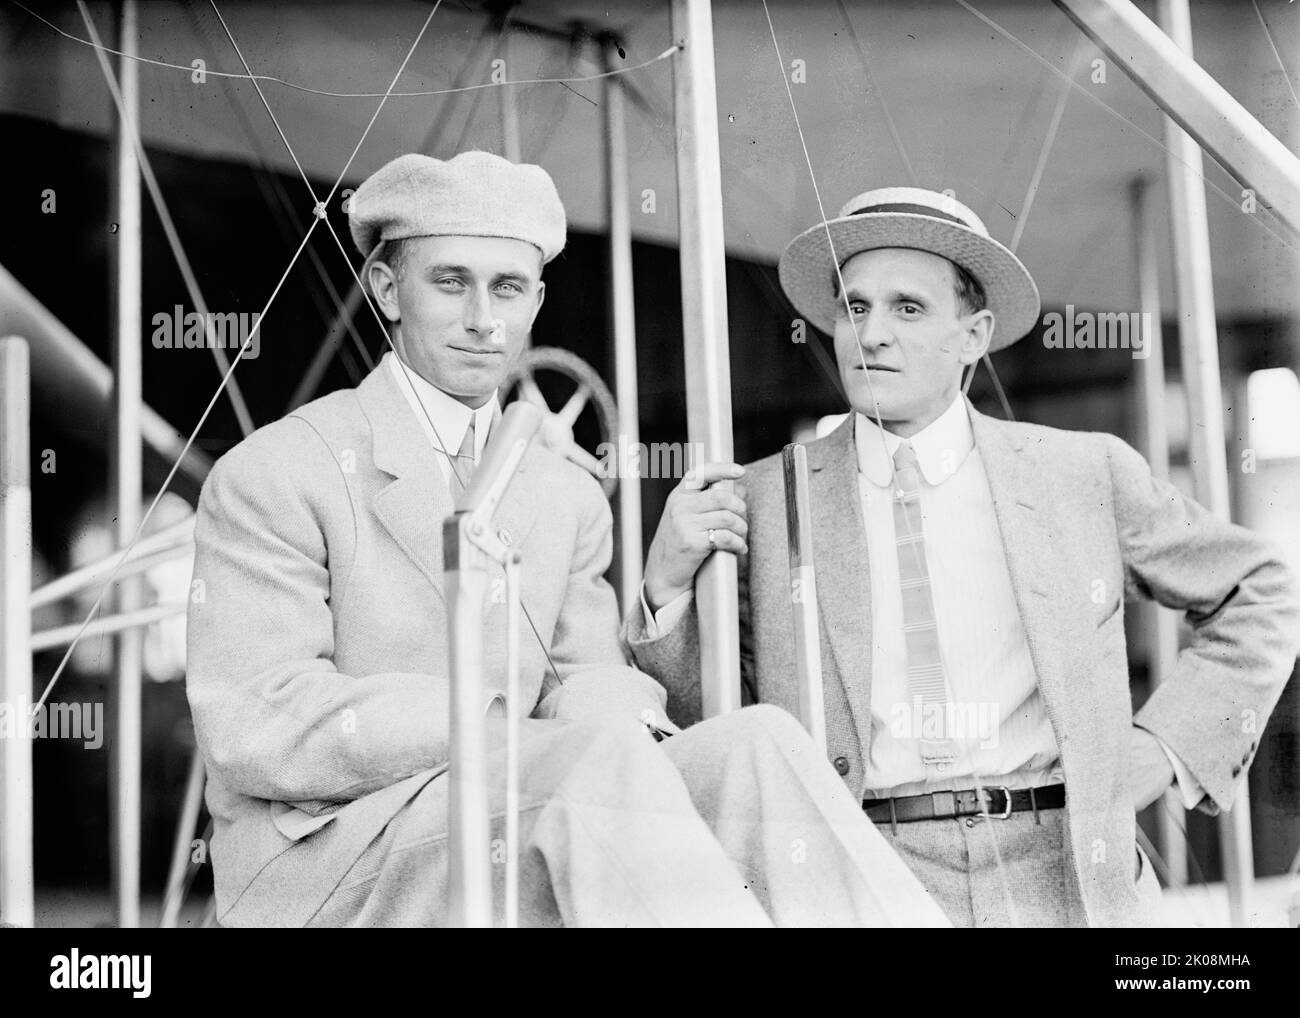 Aviator Harry Atwood, in Plane with Leo Stevens, 1911. [US aviation pineer, engineer and inventor Atwood was chief flight instructor for William Starling Burgess whose Burgess Company built a variety of airplanes, including licensed Wright aircraft. Seen here with balloonist Albert Leo Stevens]. Stock Photo